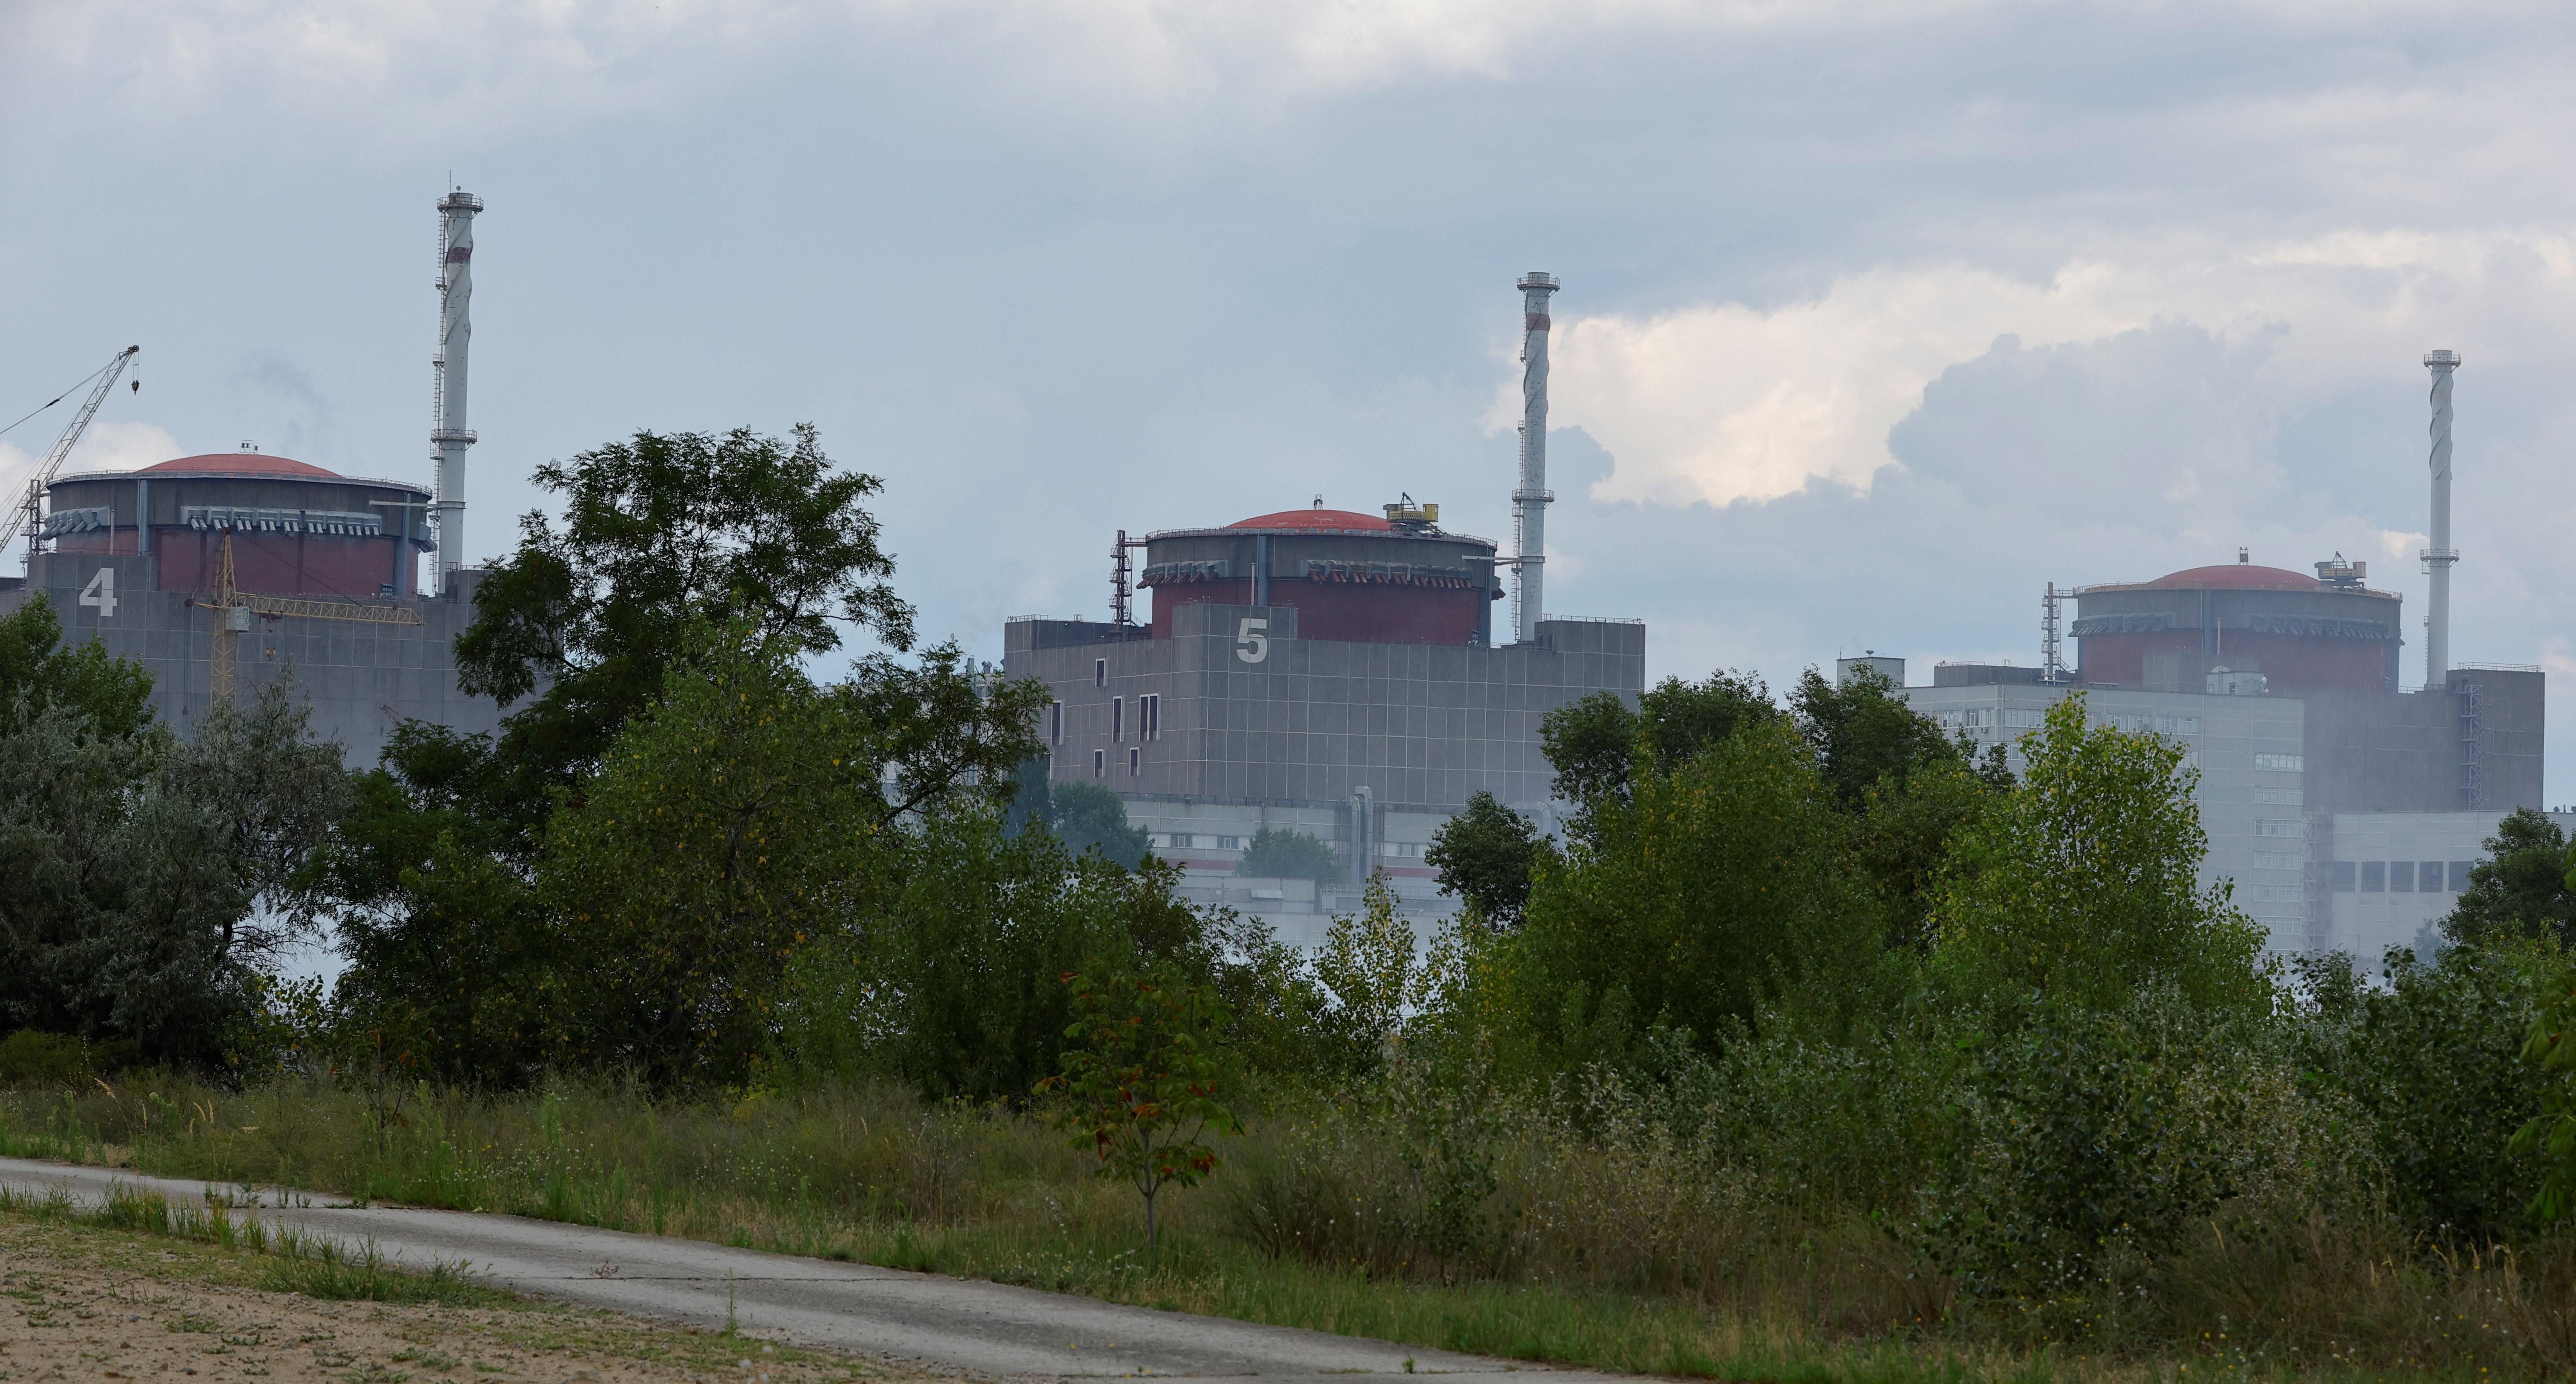 The Zaporizhzhia nuclear power plant in southeastern Ukraine is shown on August 4, 2022.